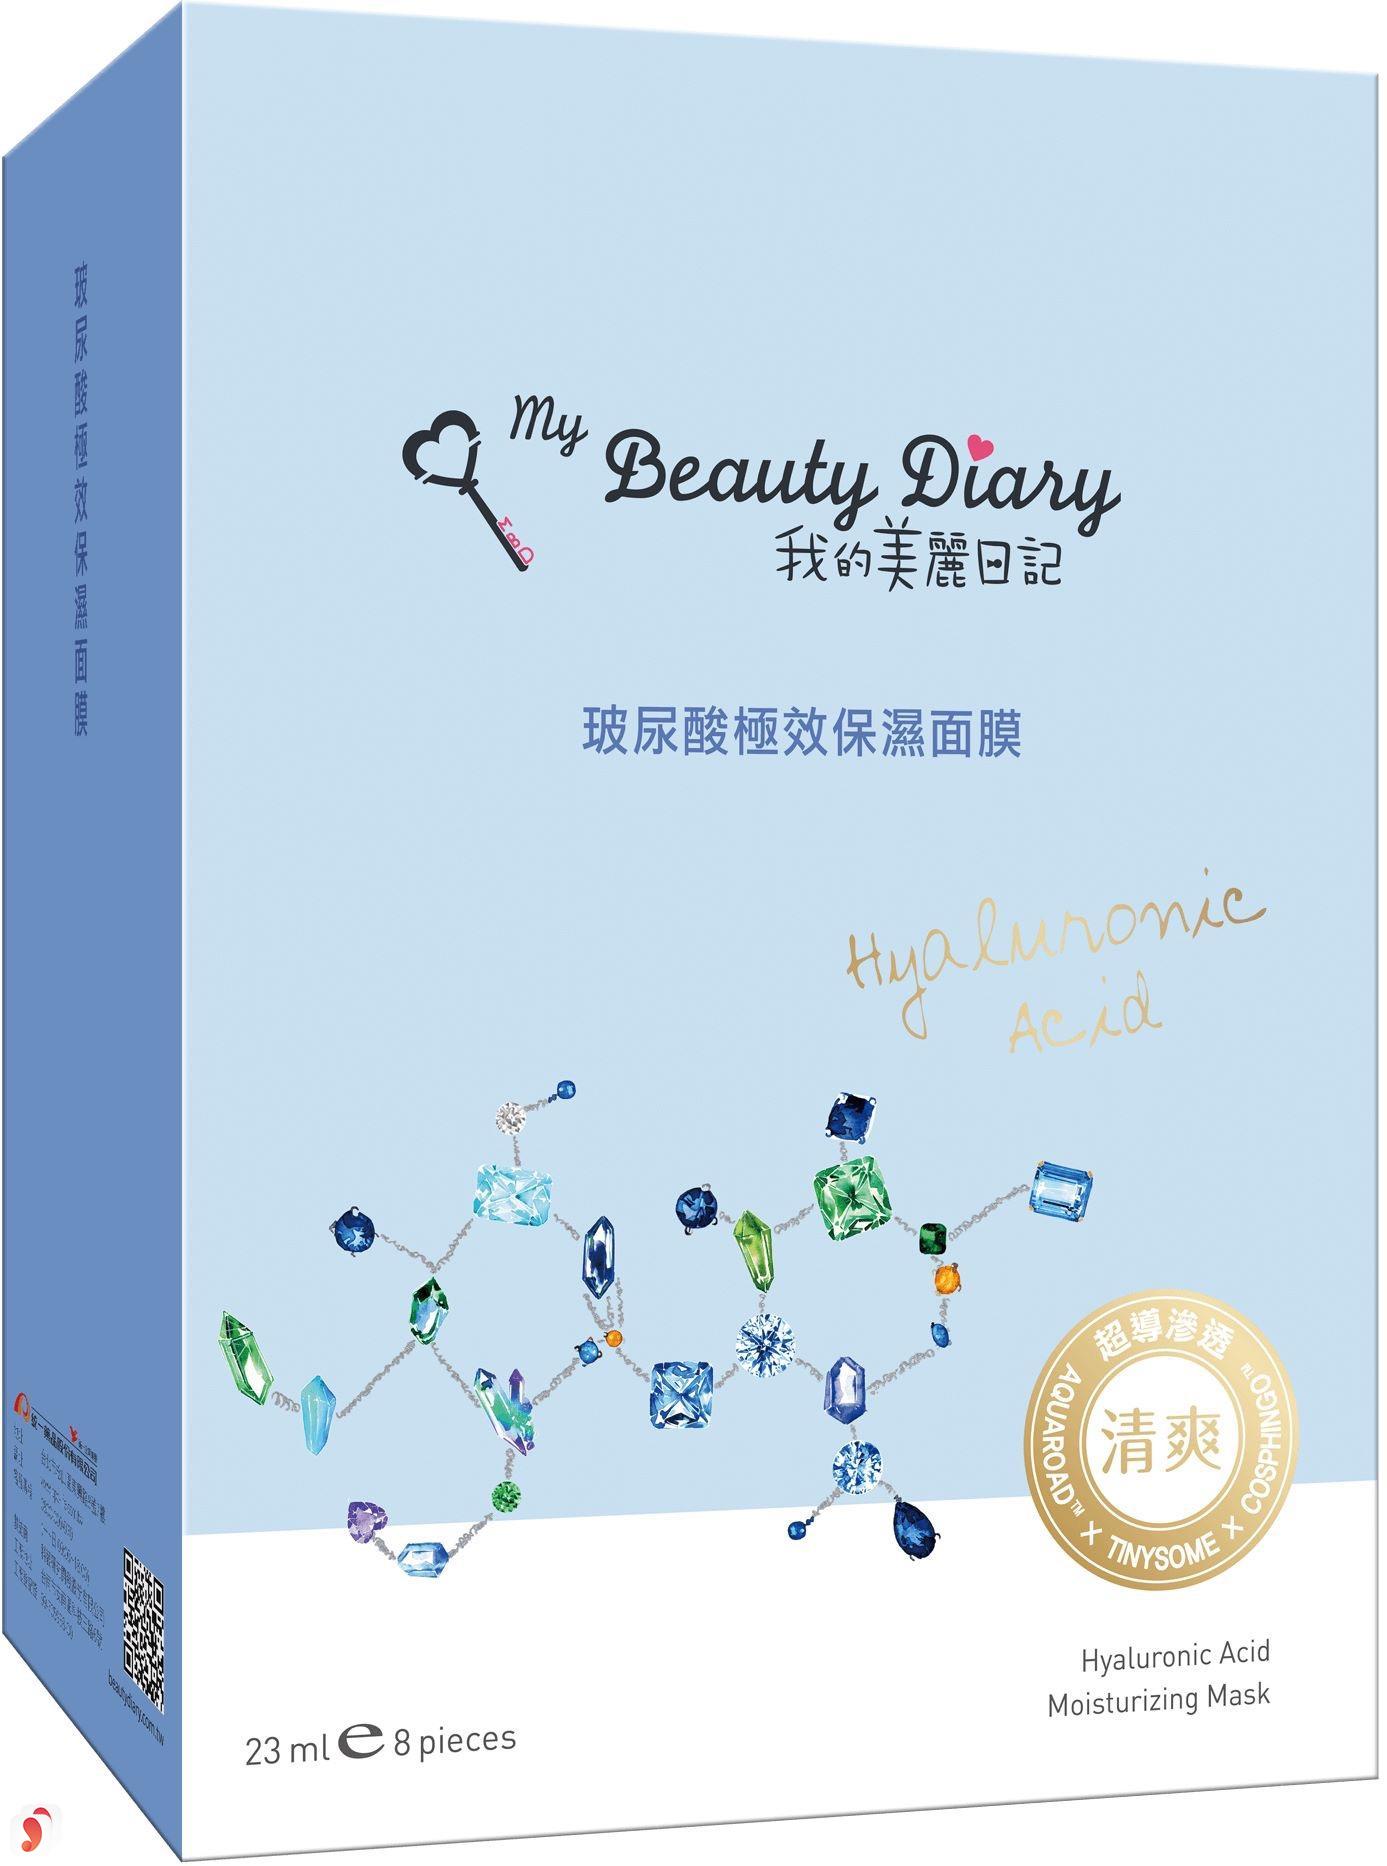 Mặt nạ My Beauty Diary Hyaluronic Acid 2